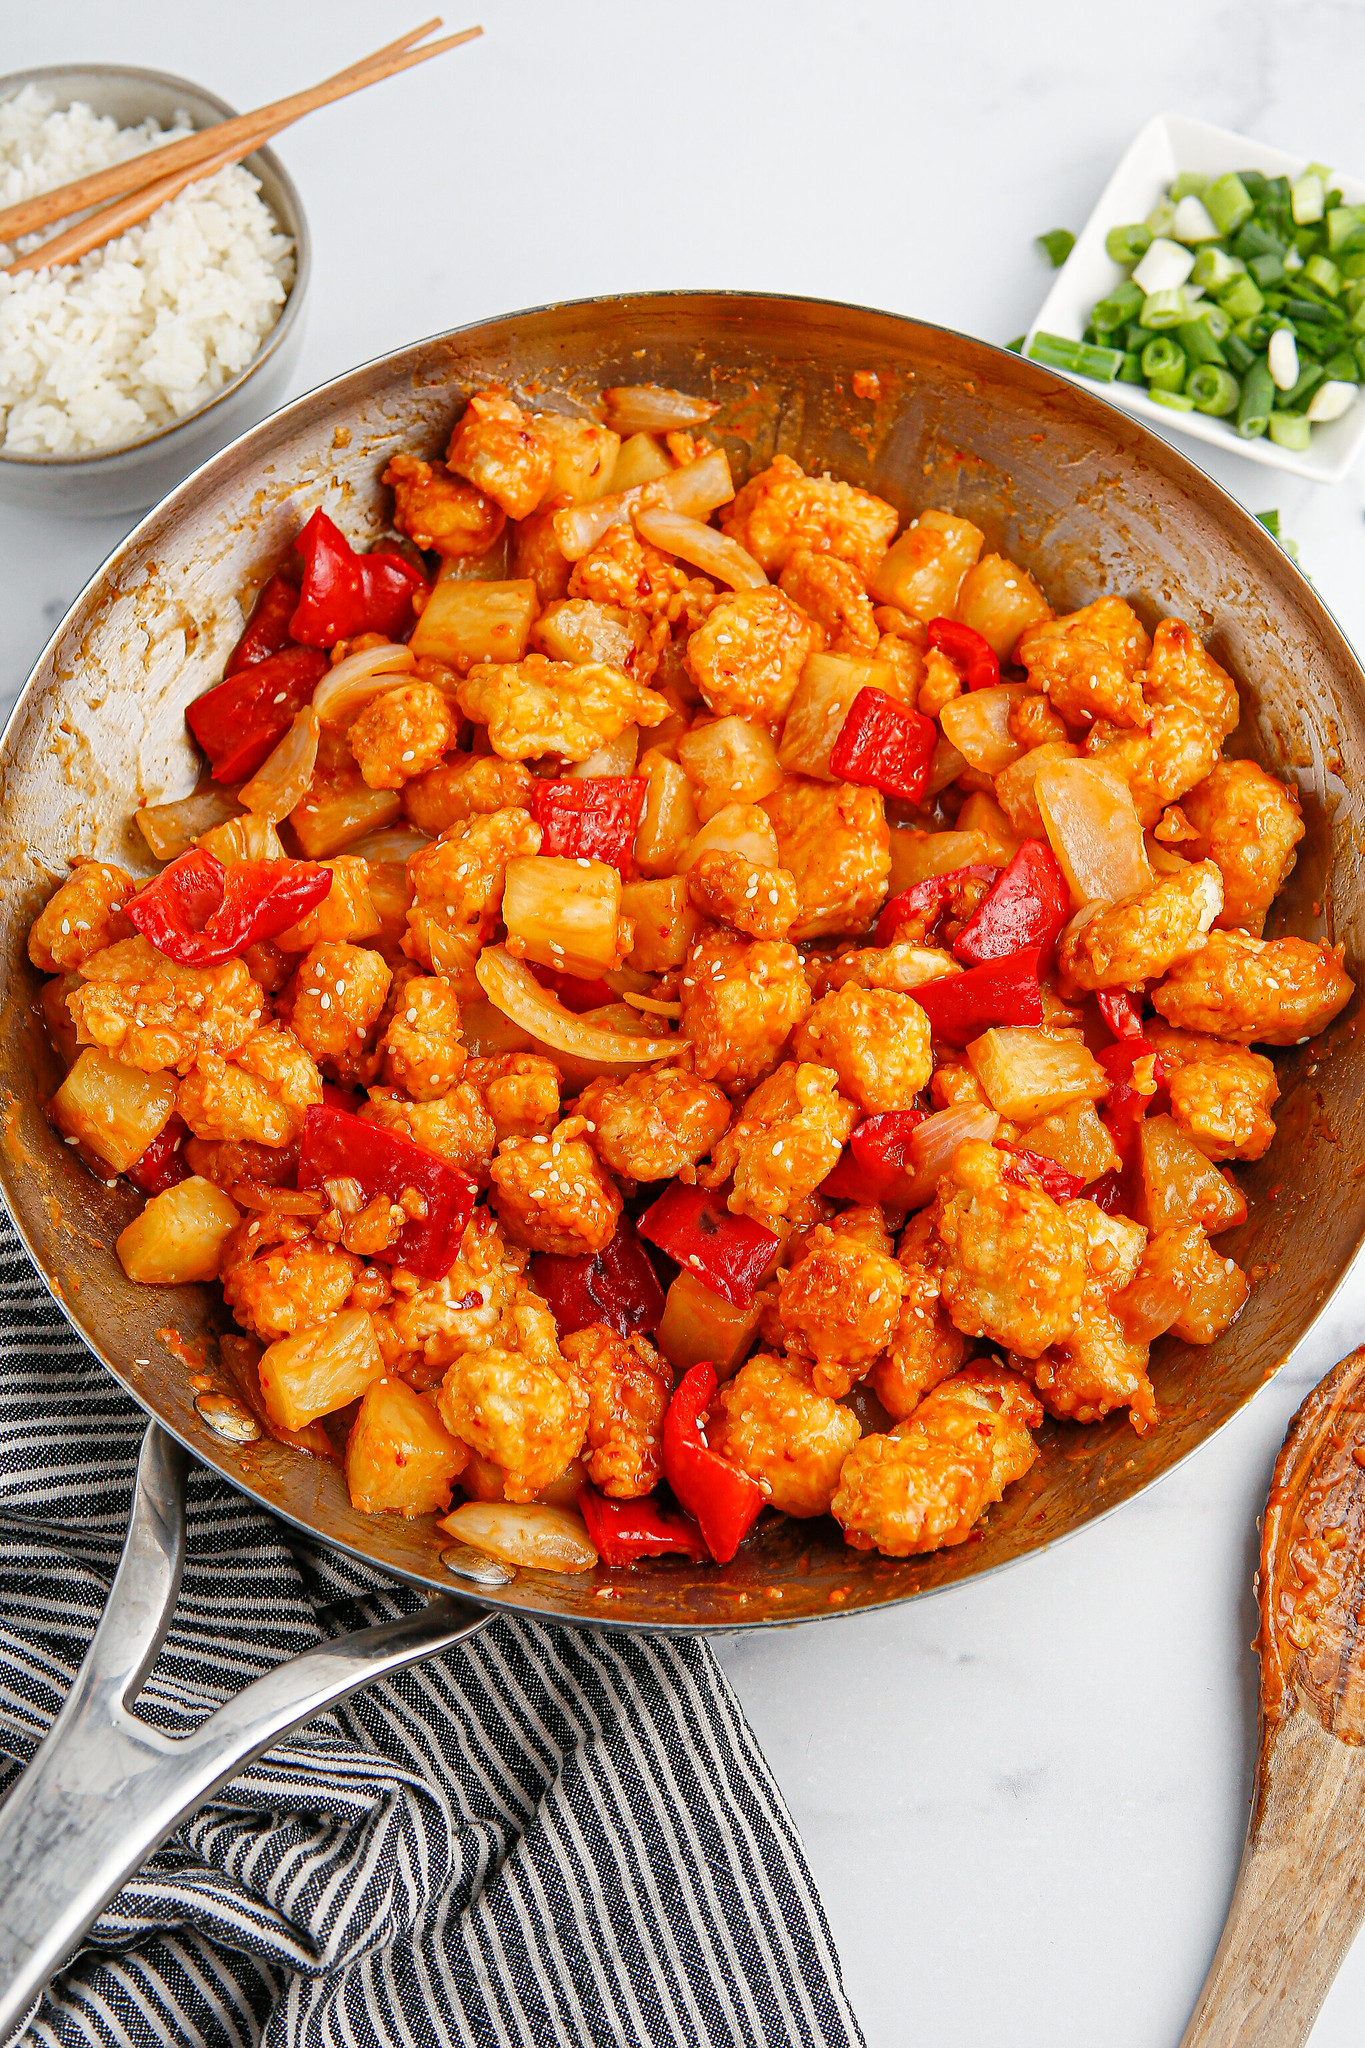 A skillet full of crispy chicken stir fry with onion, red bell pepper, and pineapple